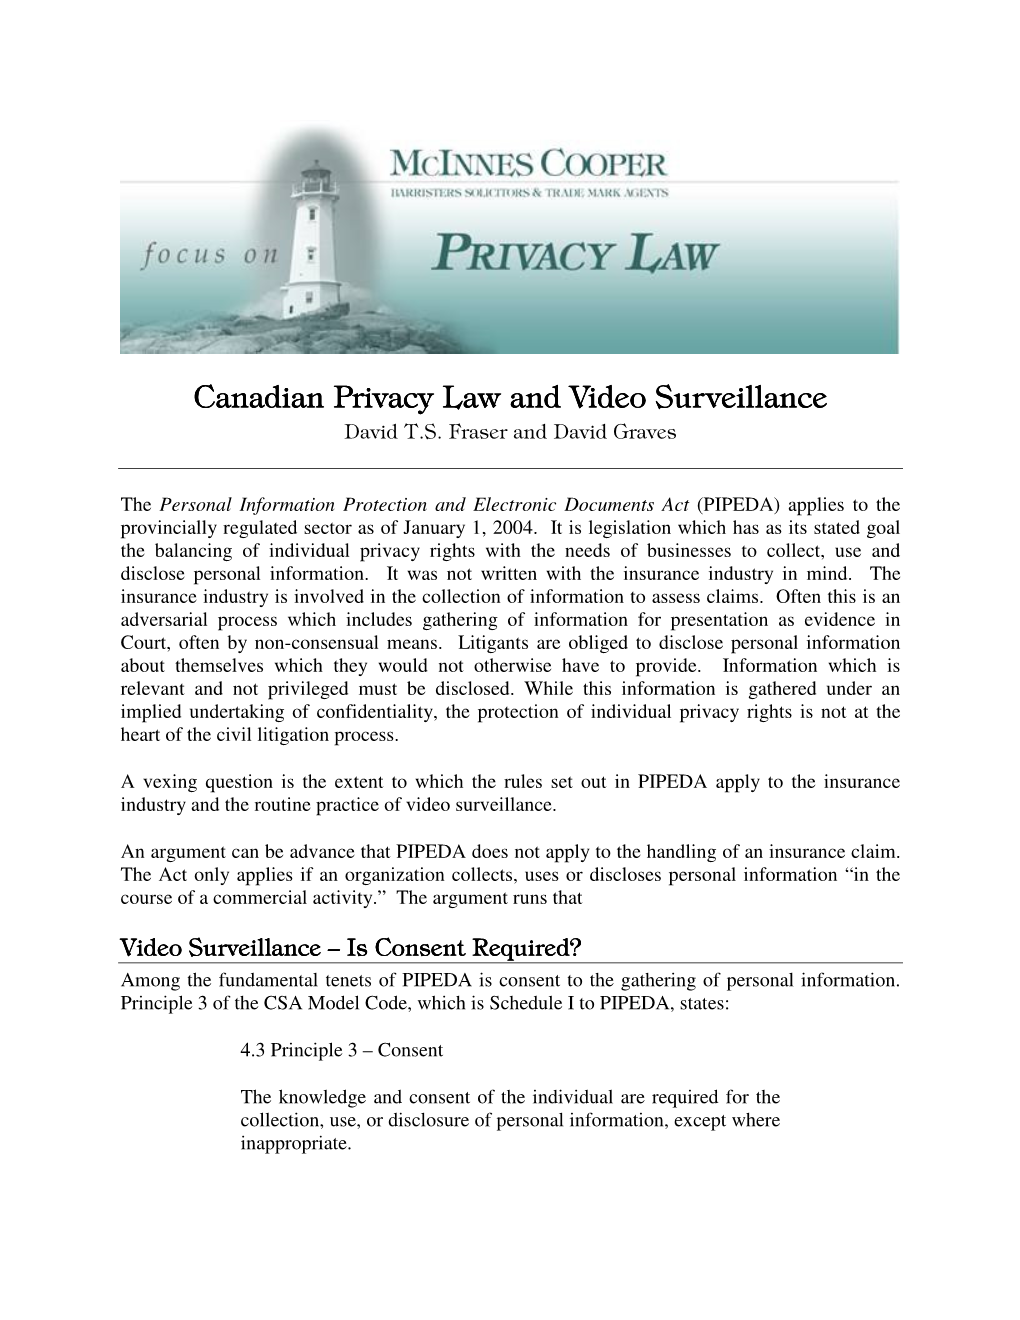 Canadian Privacy Law and Video Surveillance Canadian Privacy Law and Video Surveillance